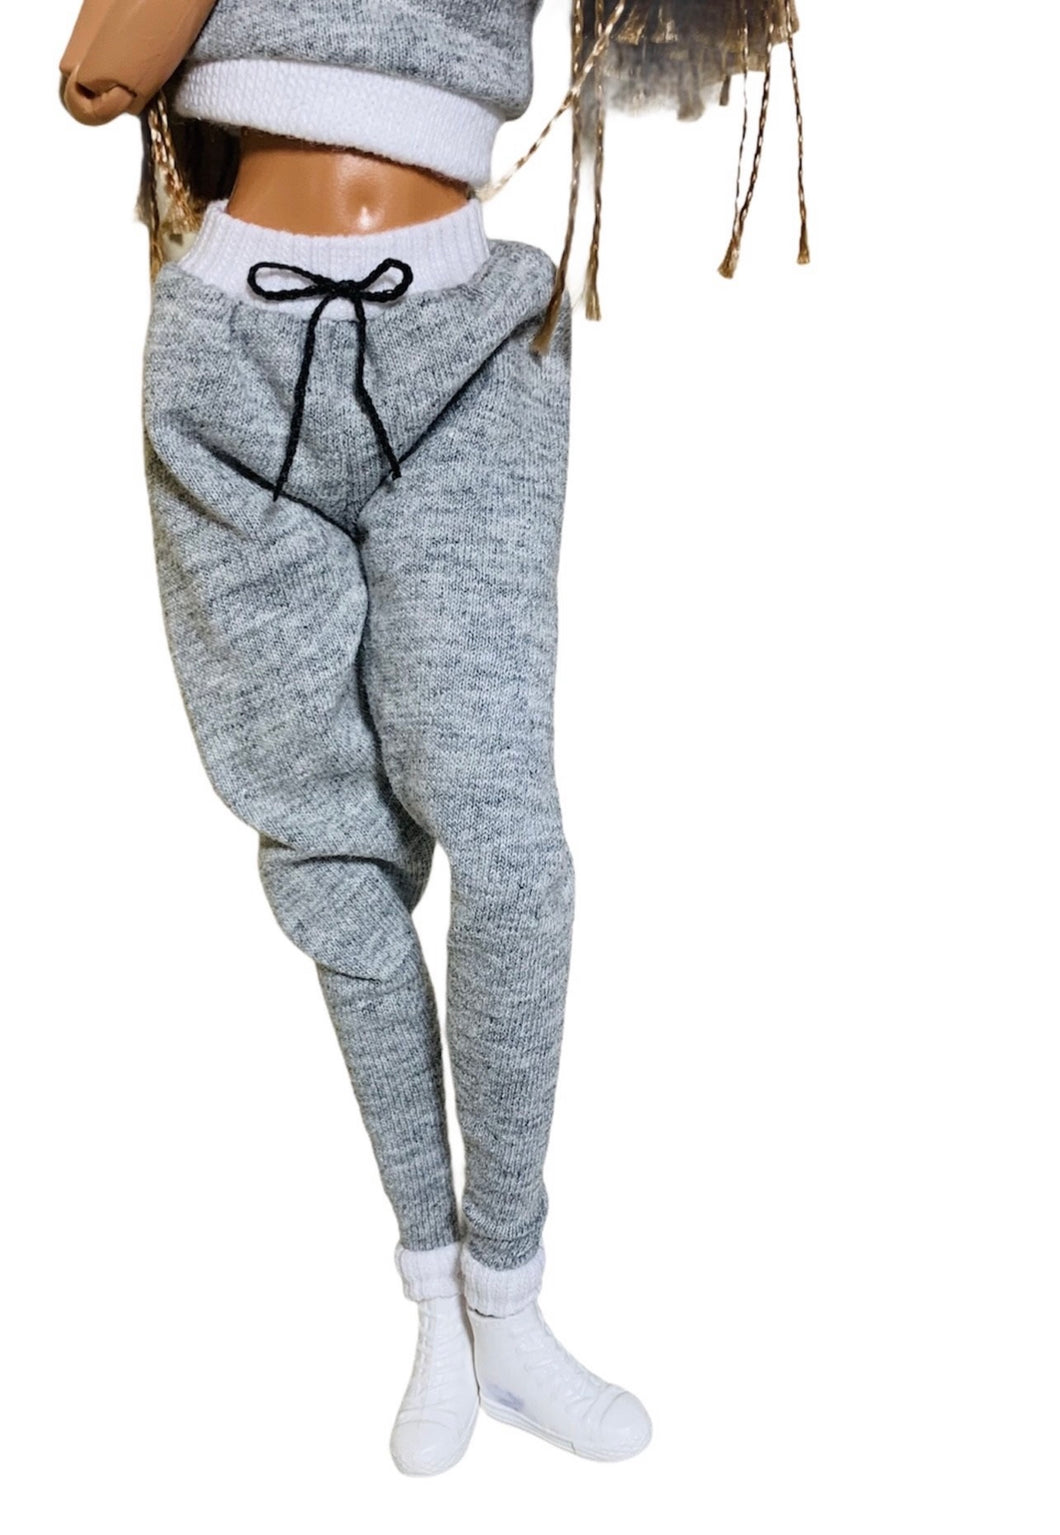 Grey sweatpants for Barbie Doll